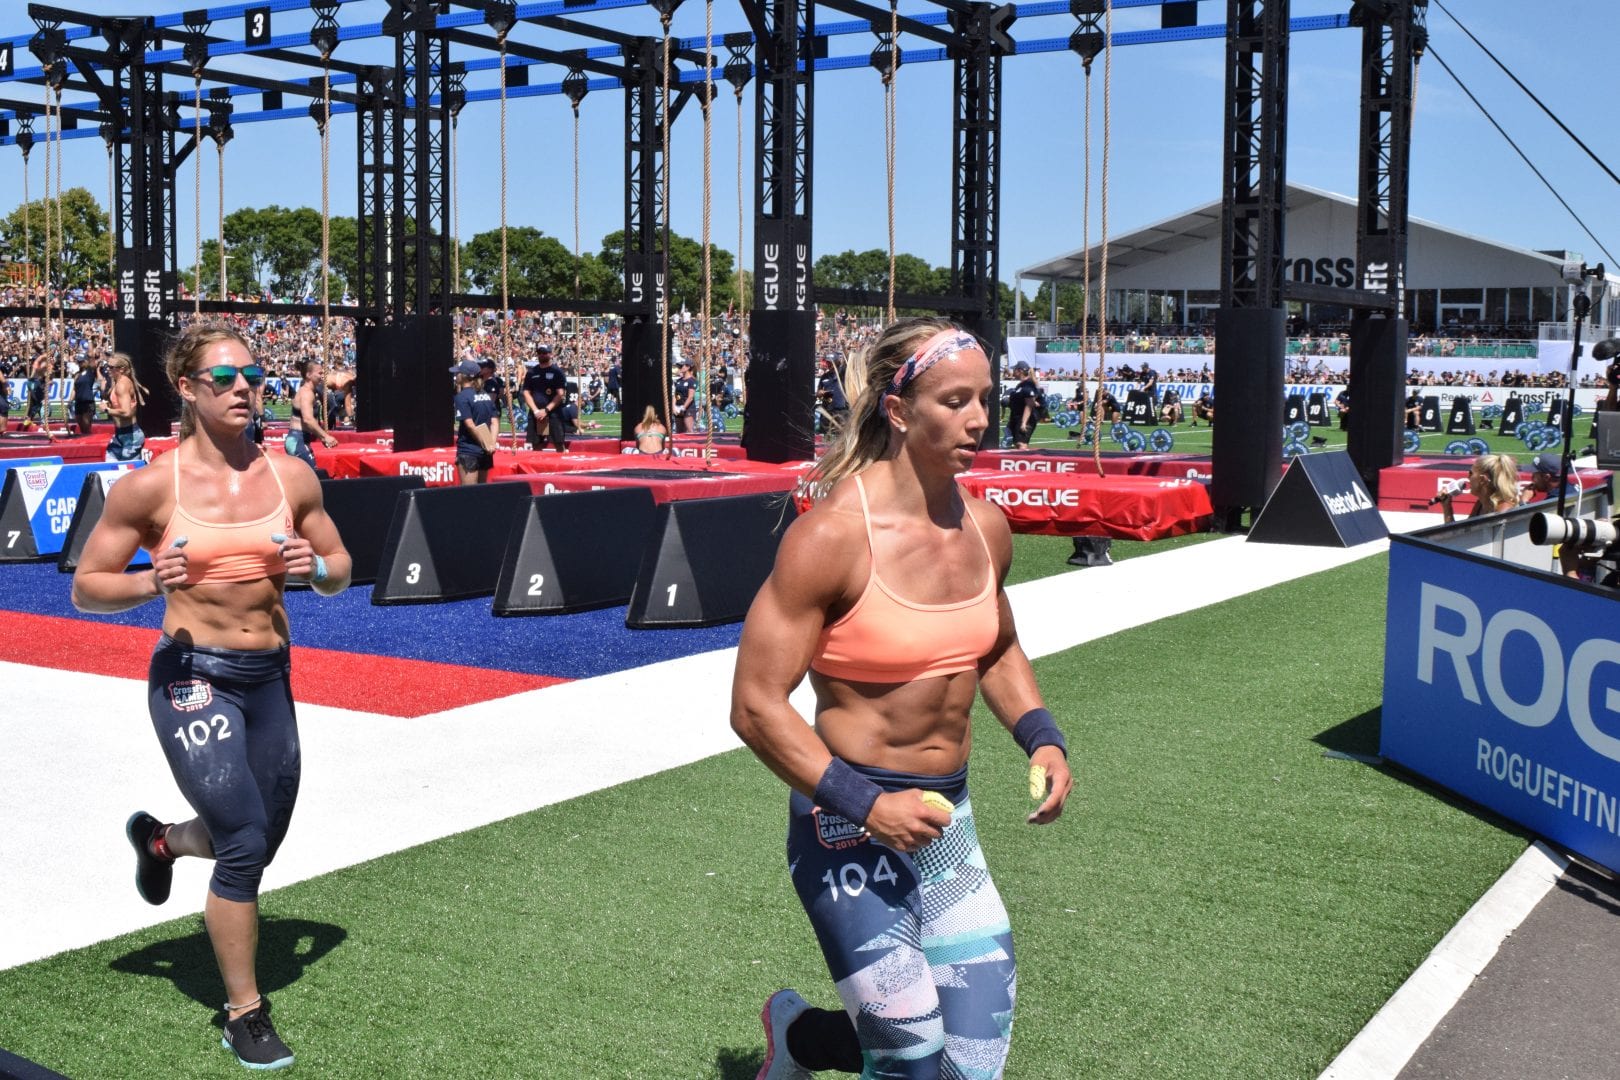 Brooke Wells chases Amanda Barnhart out of the stadium at the 2019 CrossFit Games